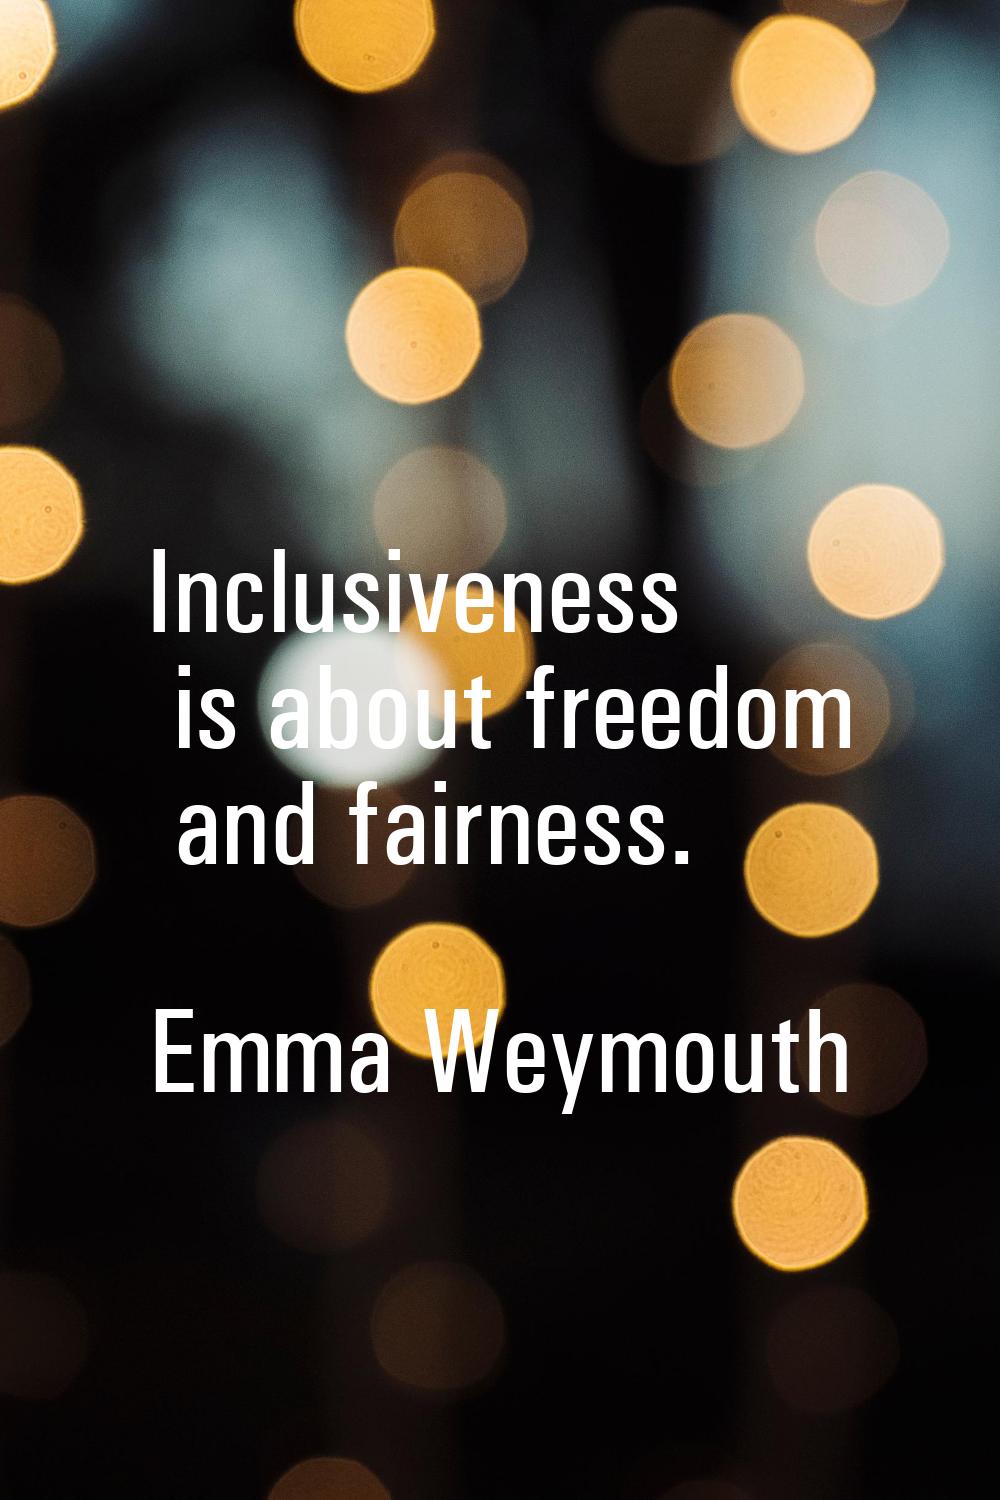 Inclusiveness is about freedom and fairness.